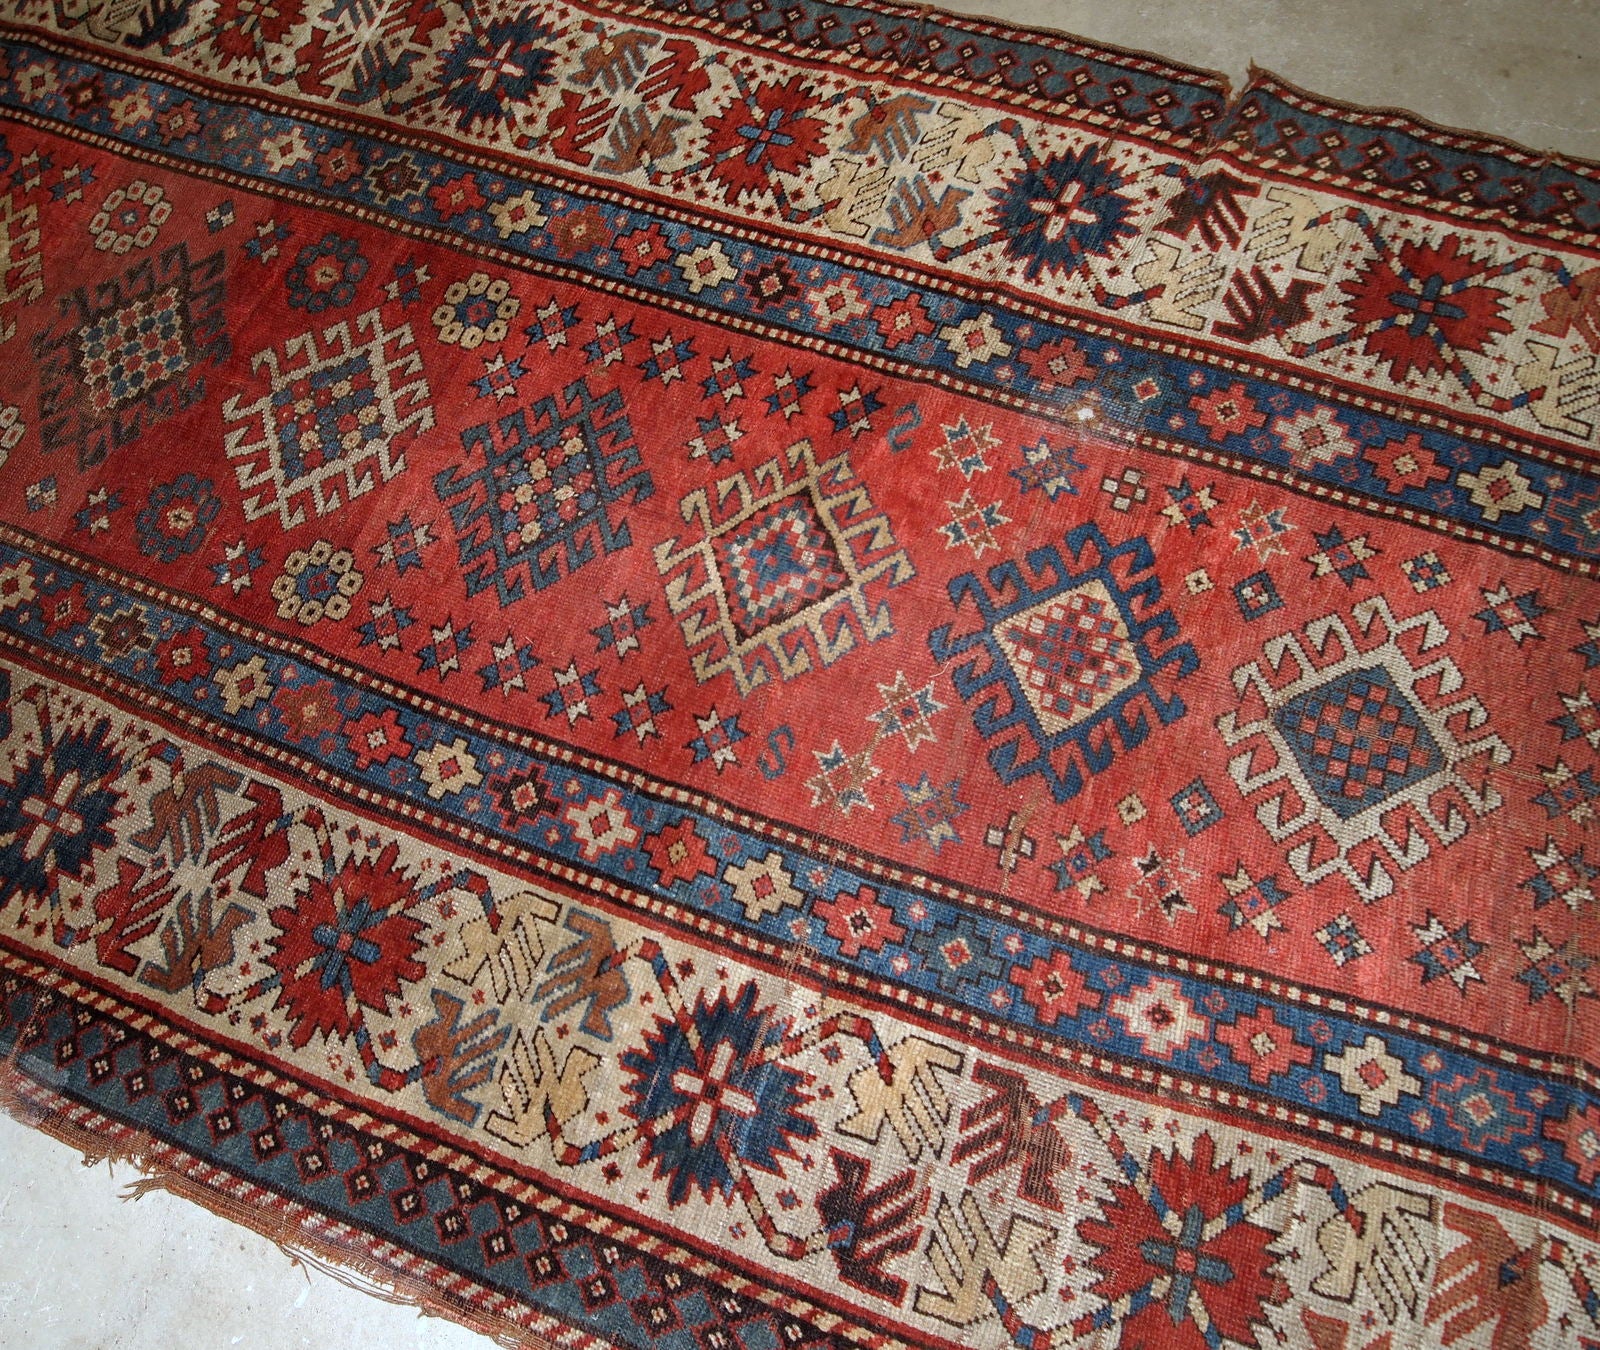 Handmade antique Caucasian Kazak rug in red and beige shades. The rug is from the end of 19th century in original condition, it has some low pile, a little cut on one side.